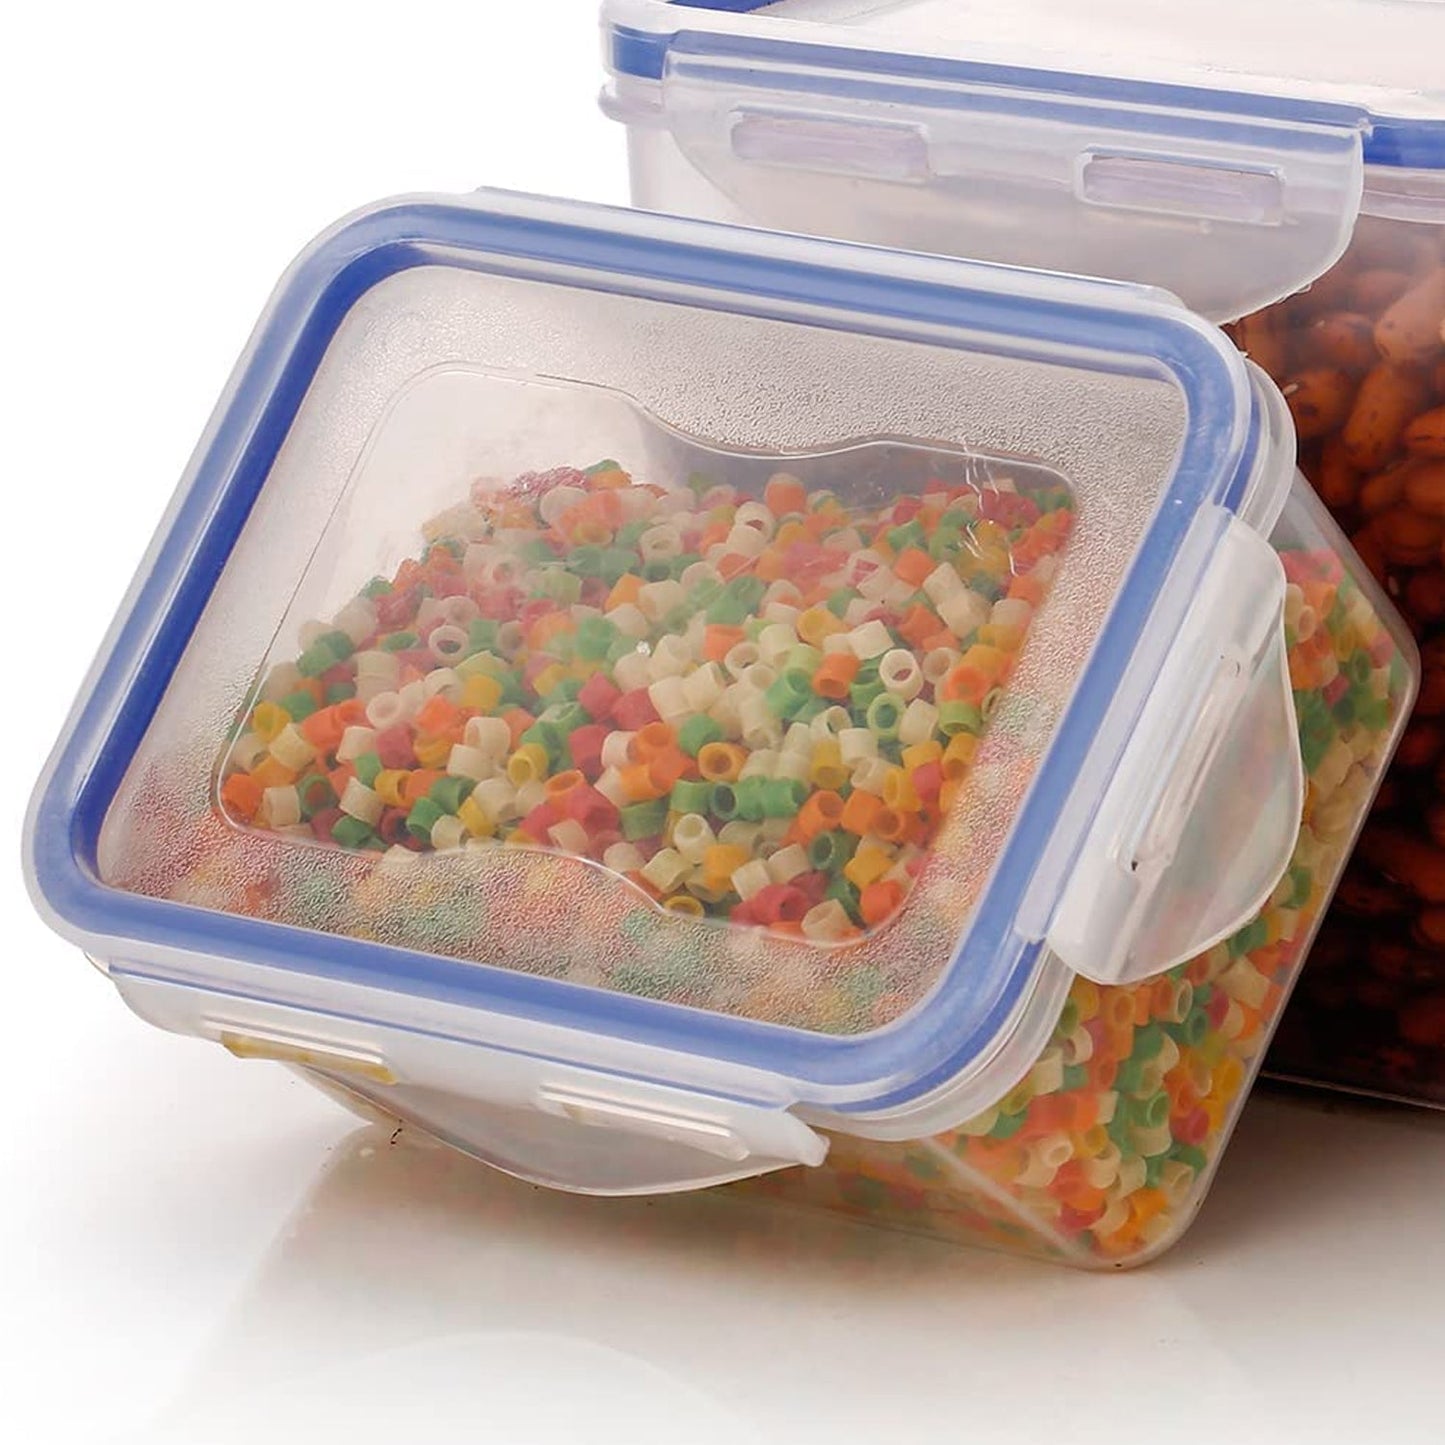 Classics Rectangular Plastic Airtight Food Storage Containers with Leak Proof Locking Lid Storage container set of 3 Pc 500ml,1000ml,1500ml